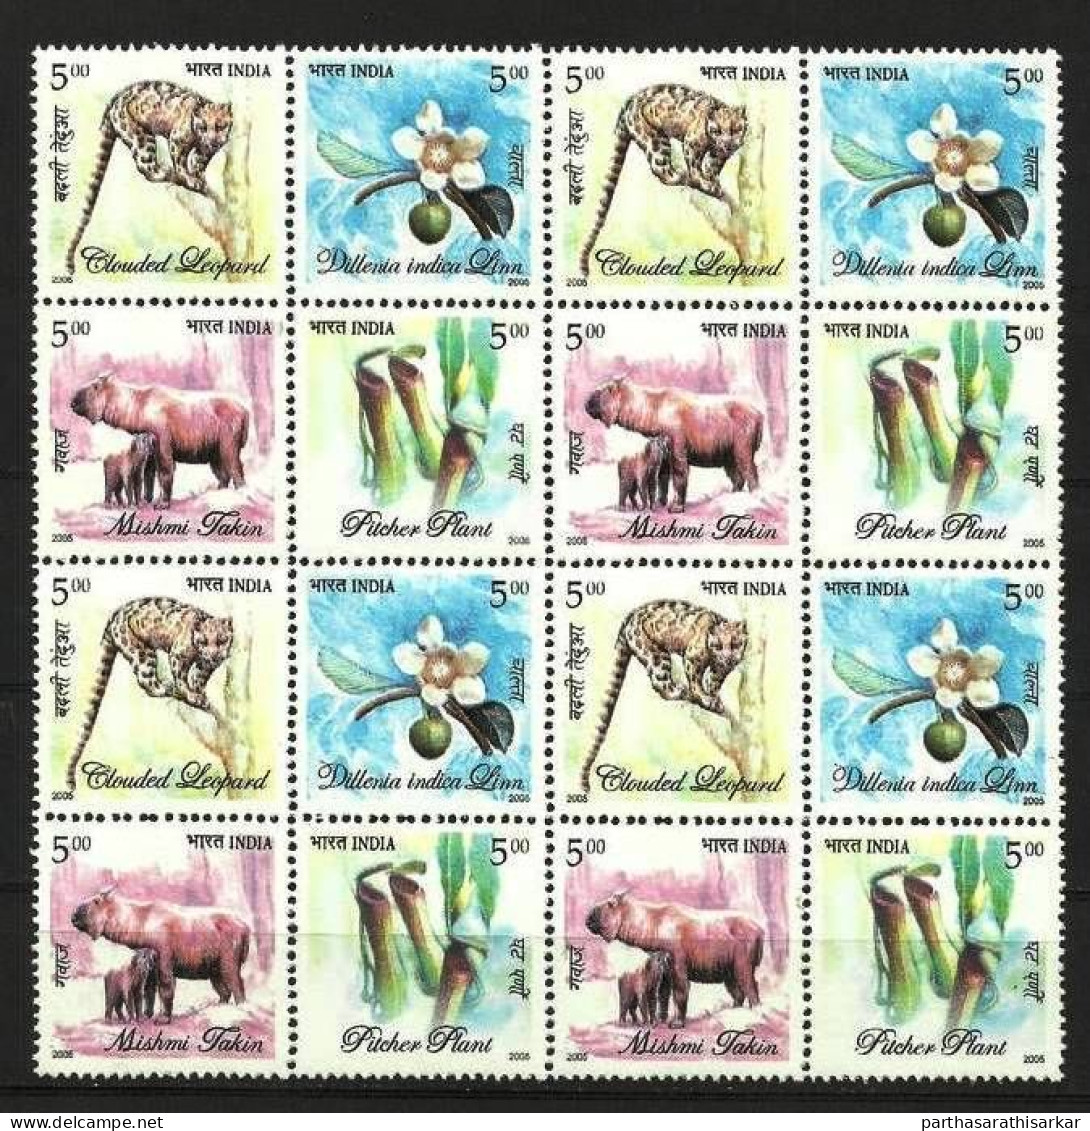 INDIA 2005 FLORA AND FAUNA OF NORTH EAST INDIA COMPLETE SE-TANENT BLOCK OF 4 MNH RARE - Ungebraucht